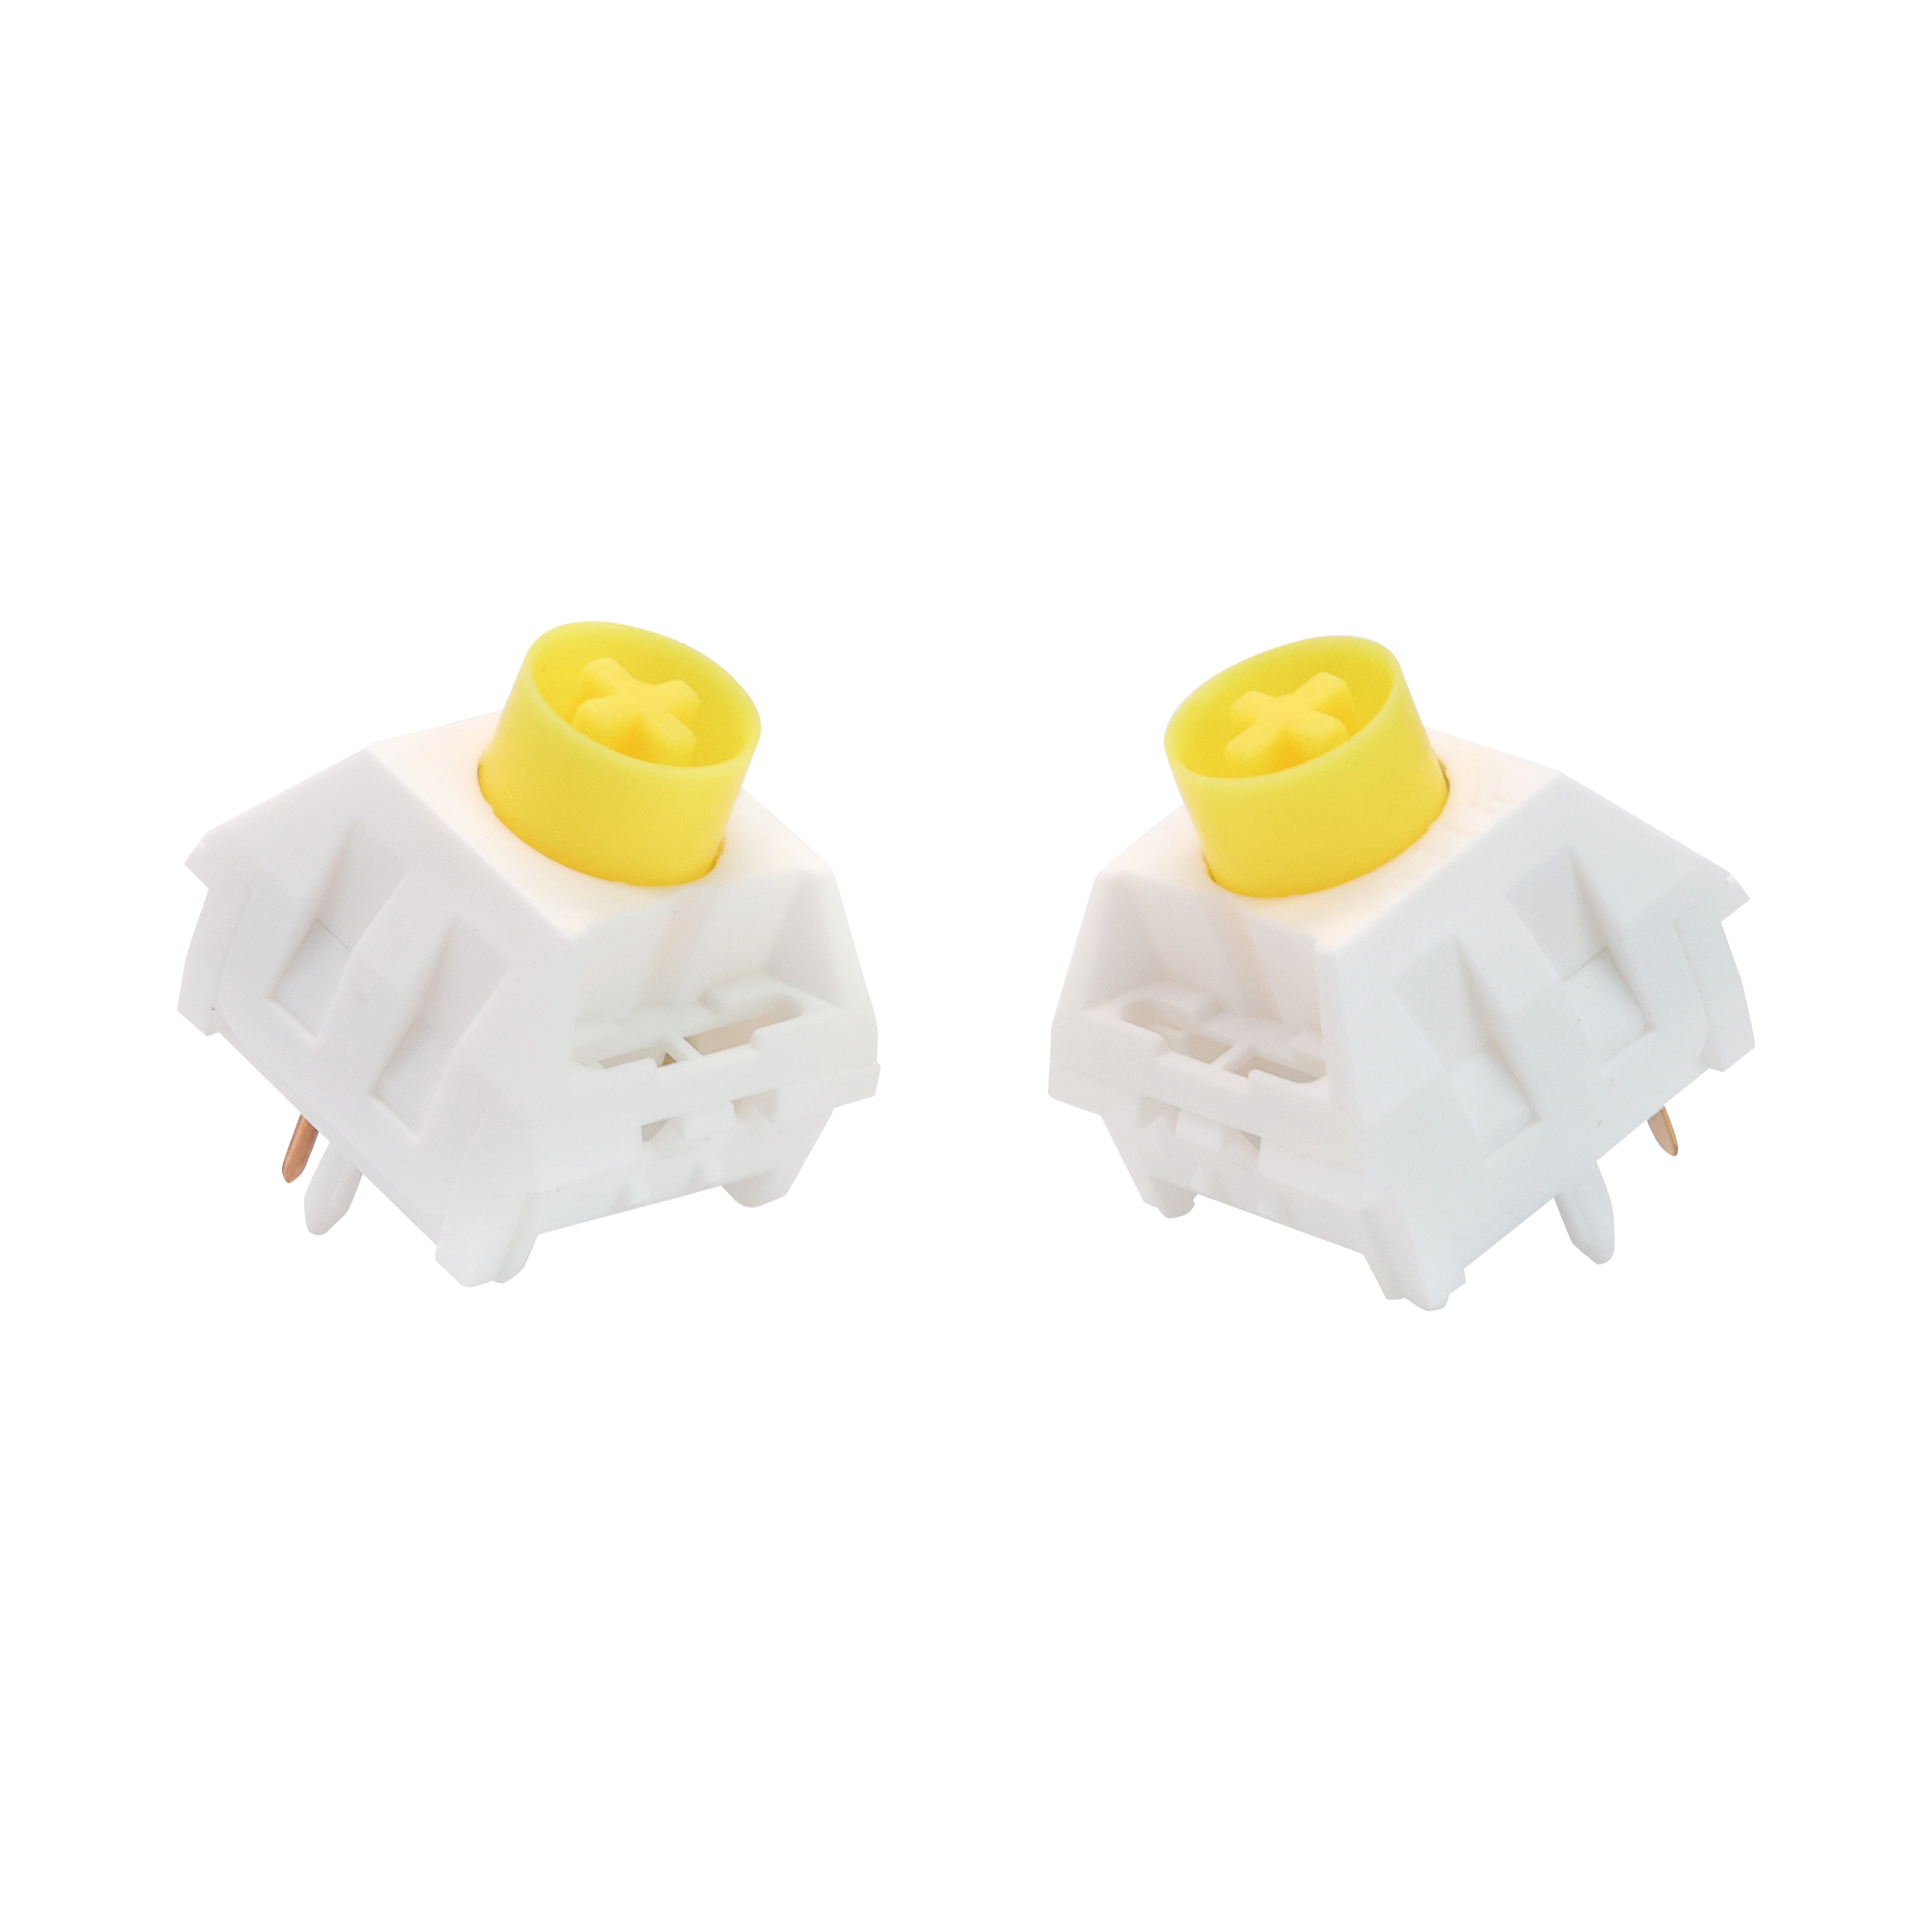 Chosfox & Kailh Fried Egg Switch